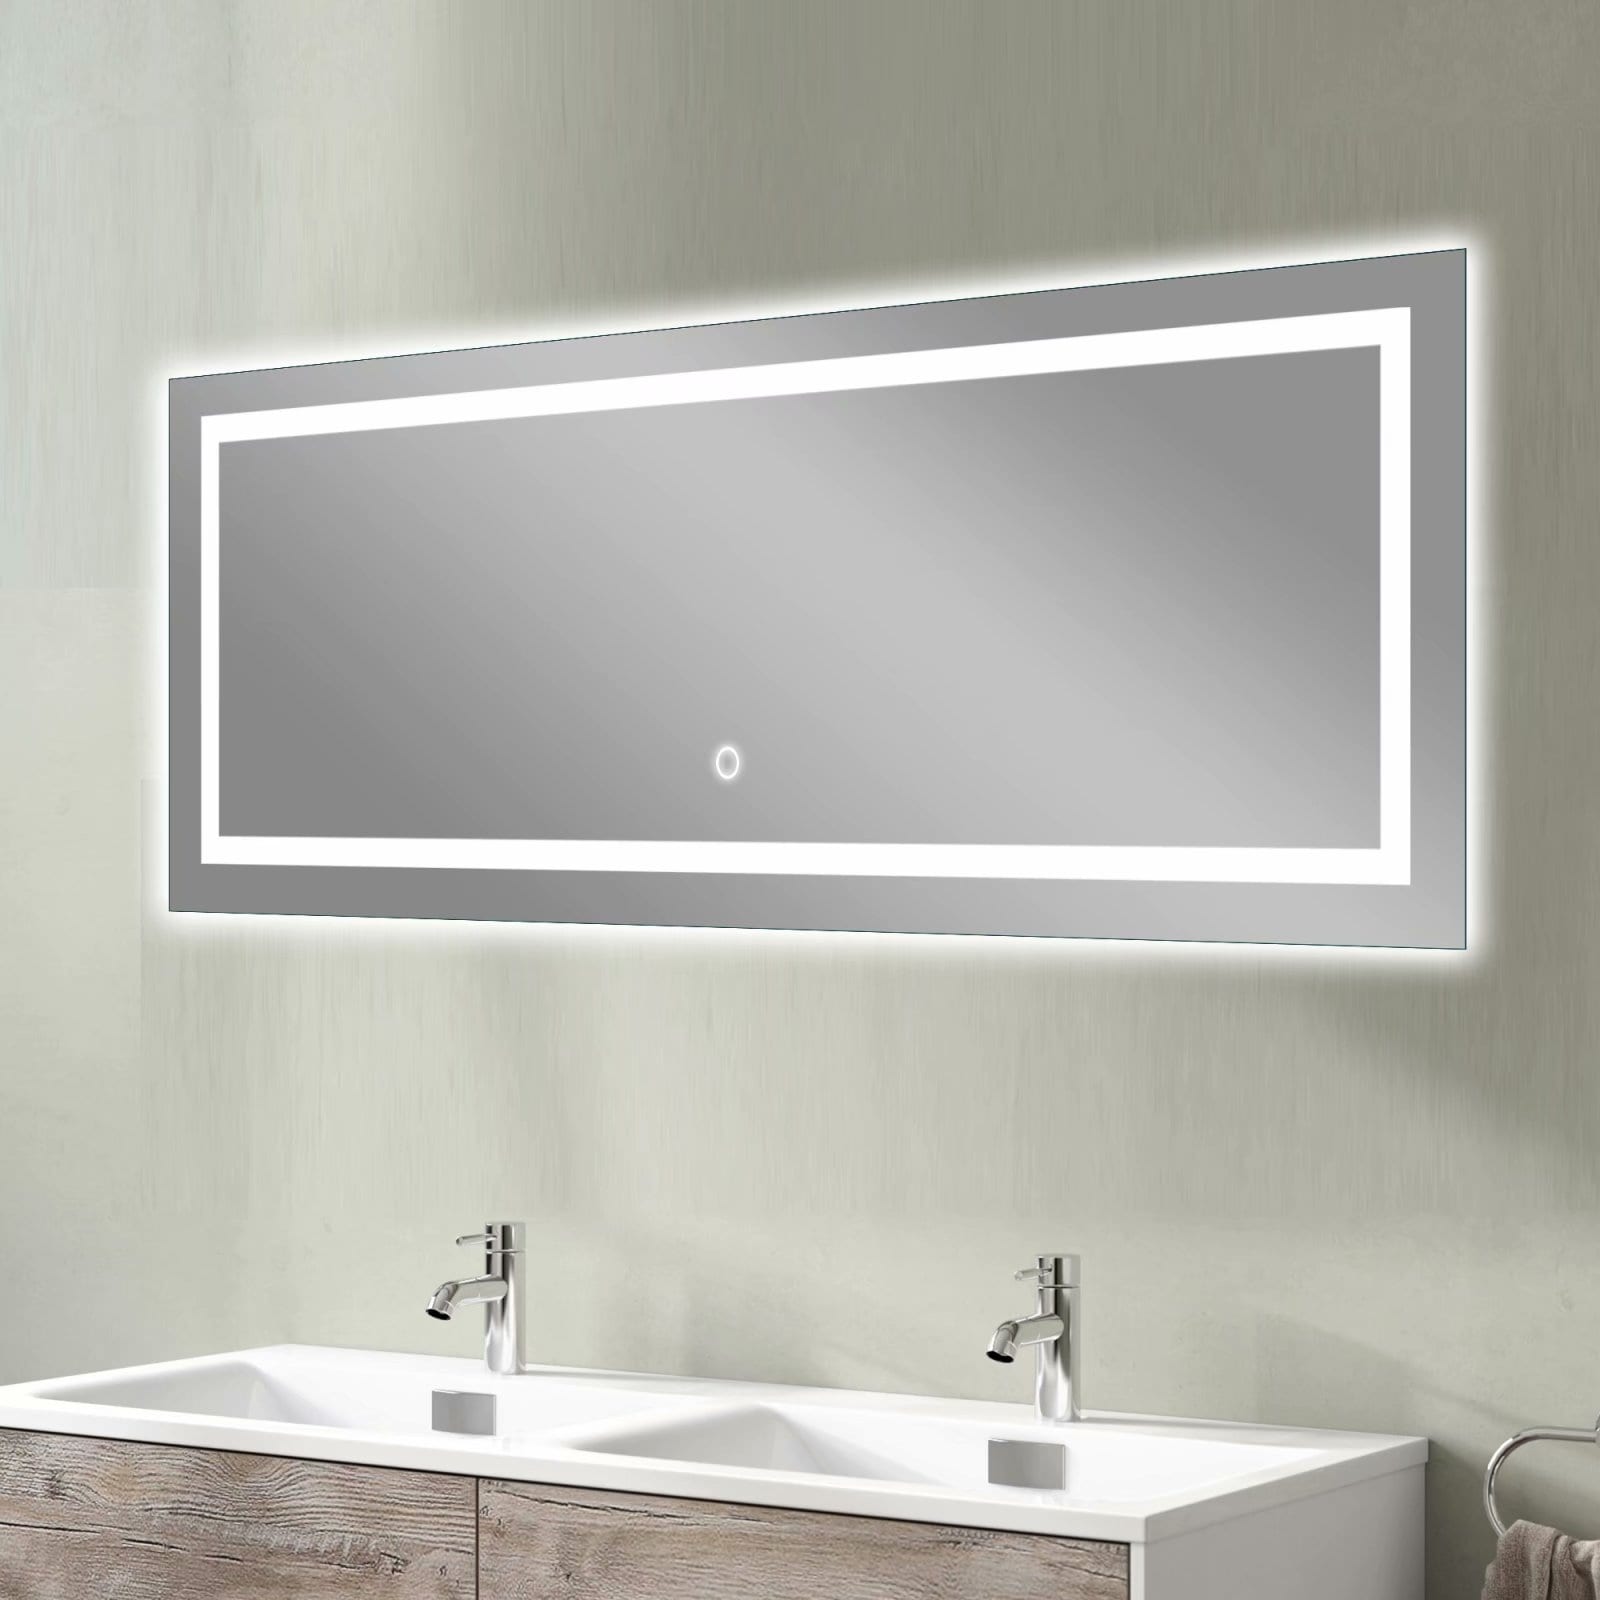 Homfa 23.6x31.5 inch LED Bathroom Mirror IP65 Waterproof+7100K High Lumens+95 CRI with Magnifier Sucker Anti-Fog Time Displaying with Dimmer Touch Wall Mounted Lighted Makeup Vanity Vertical